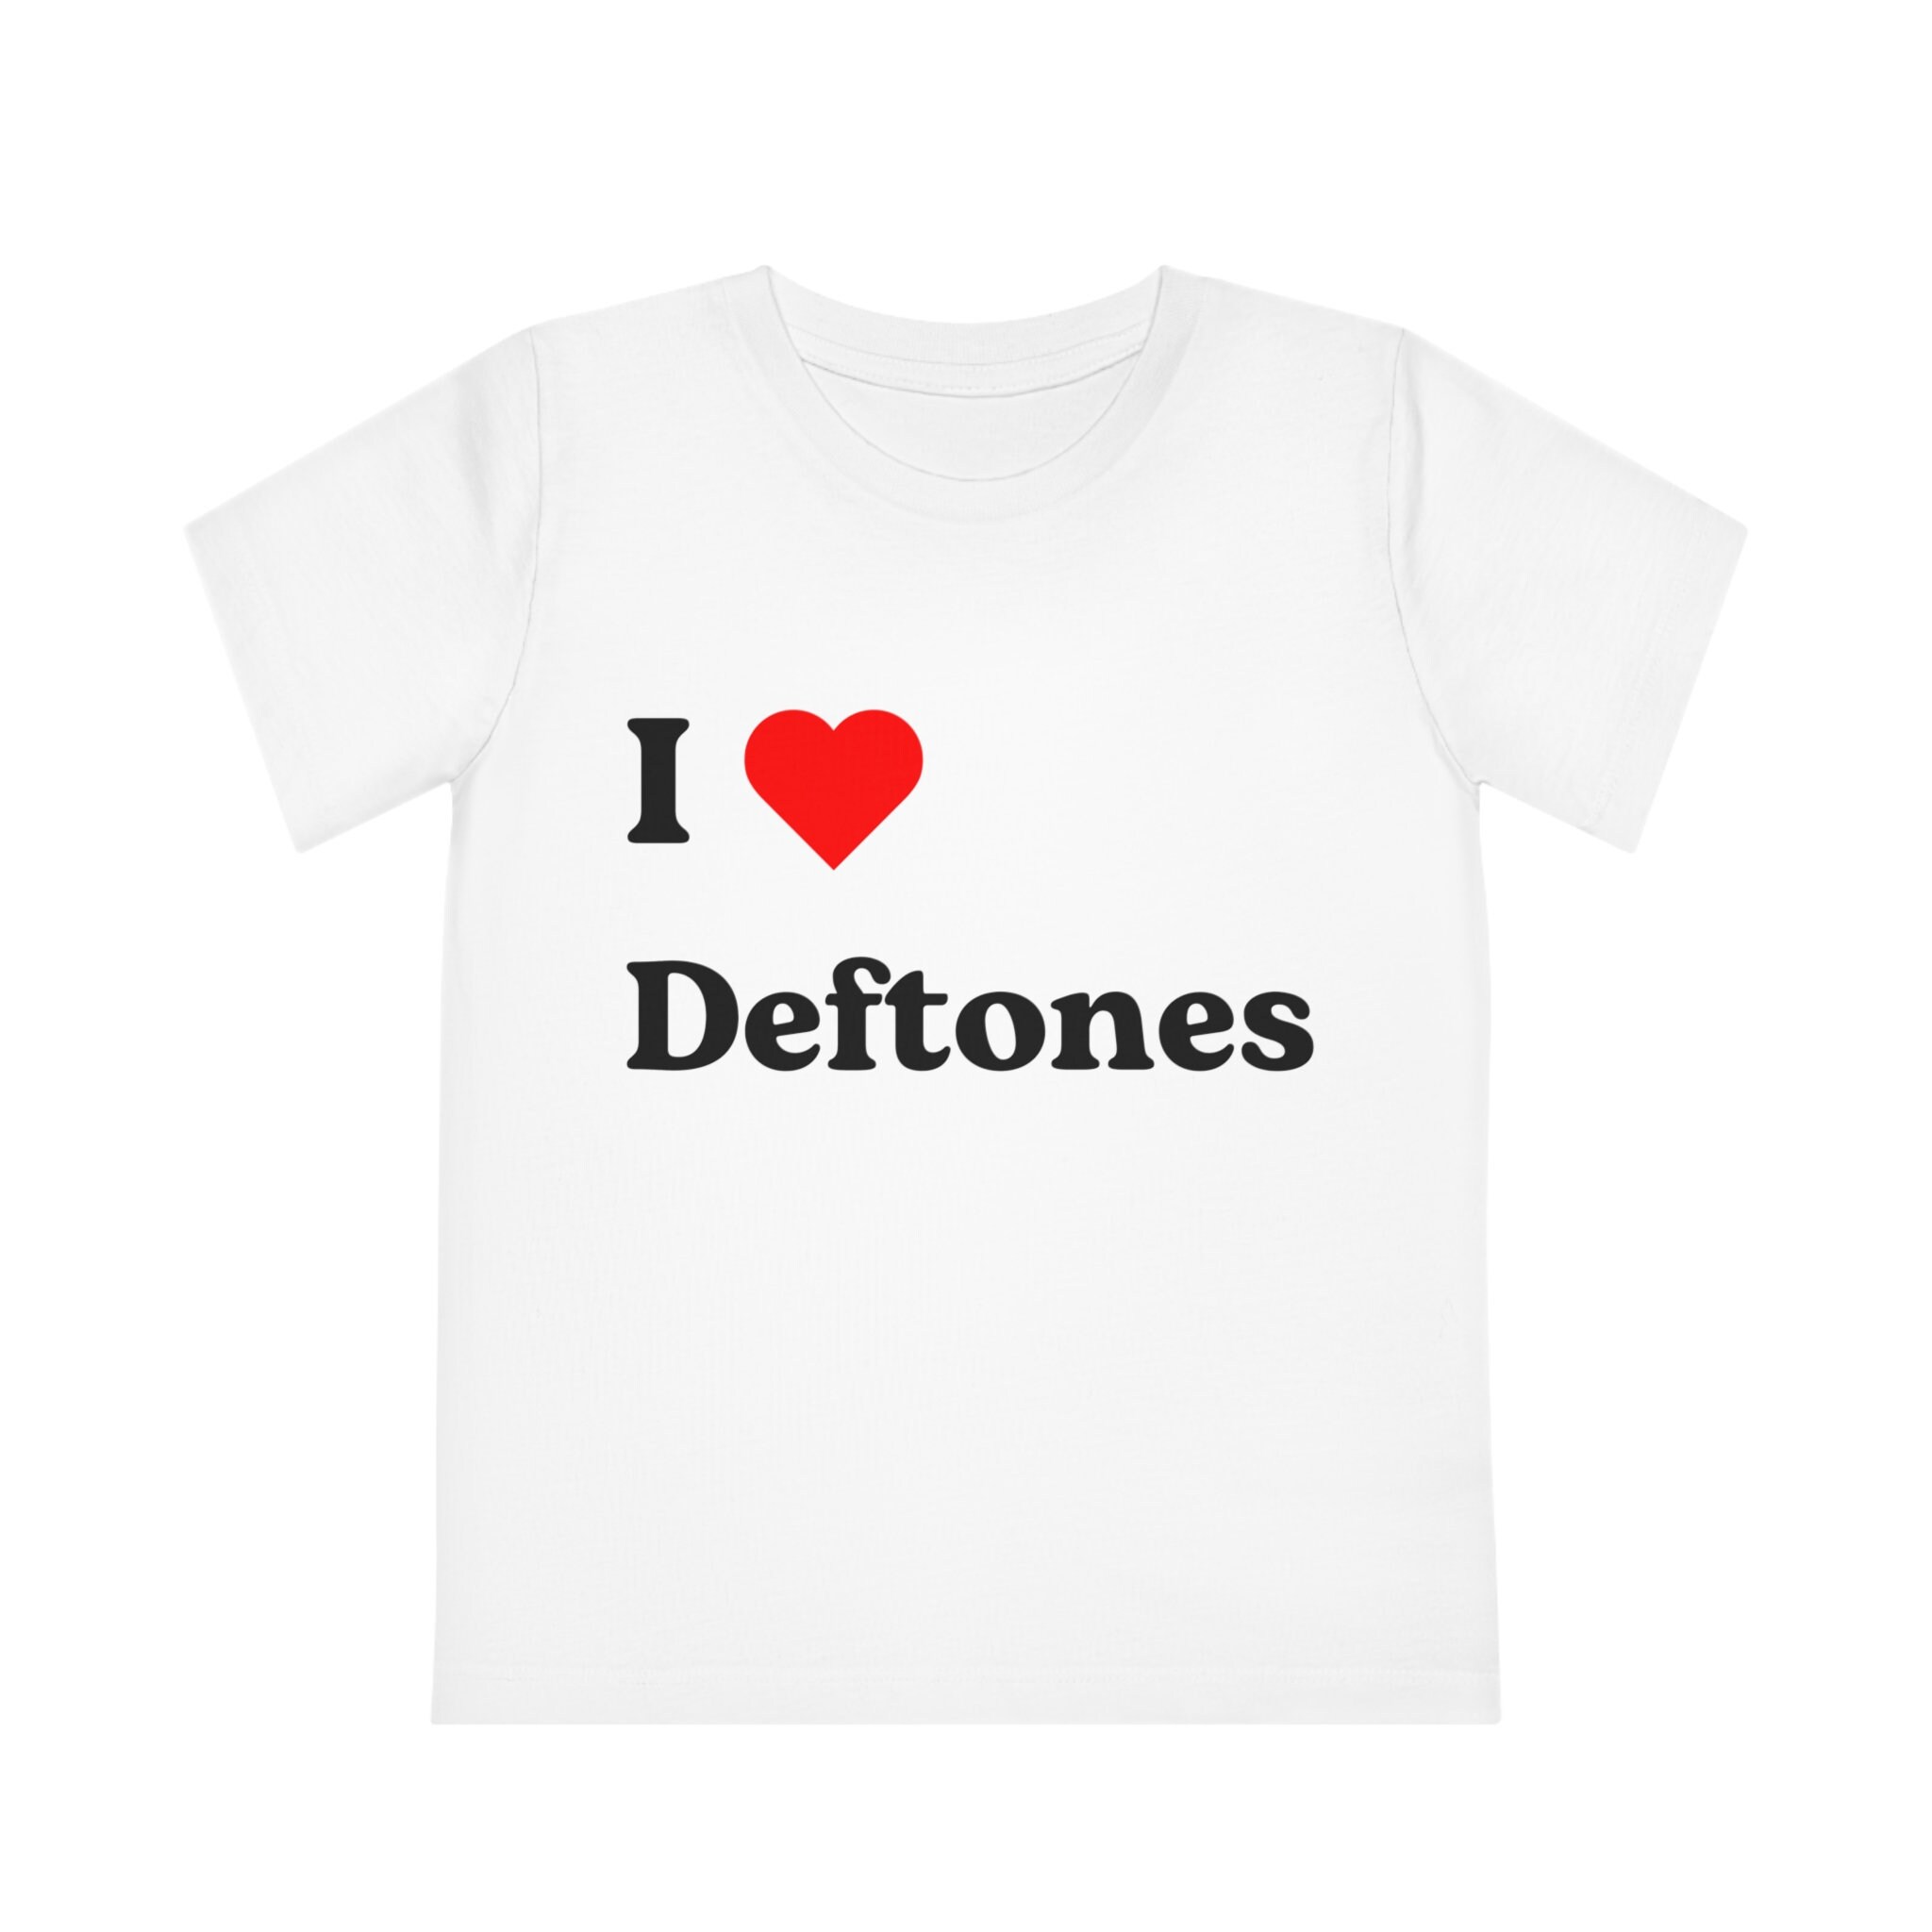 Pin by deftones Love on Auston ❤️